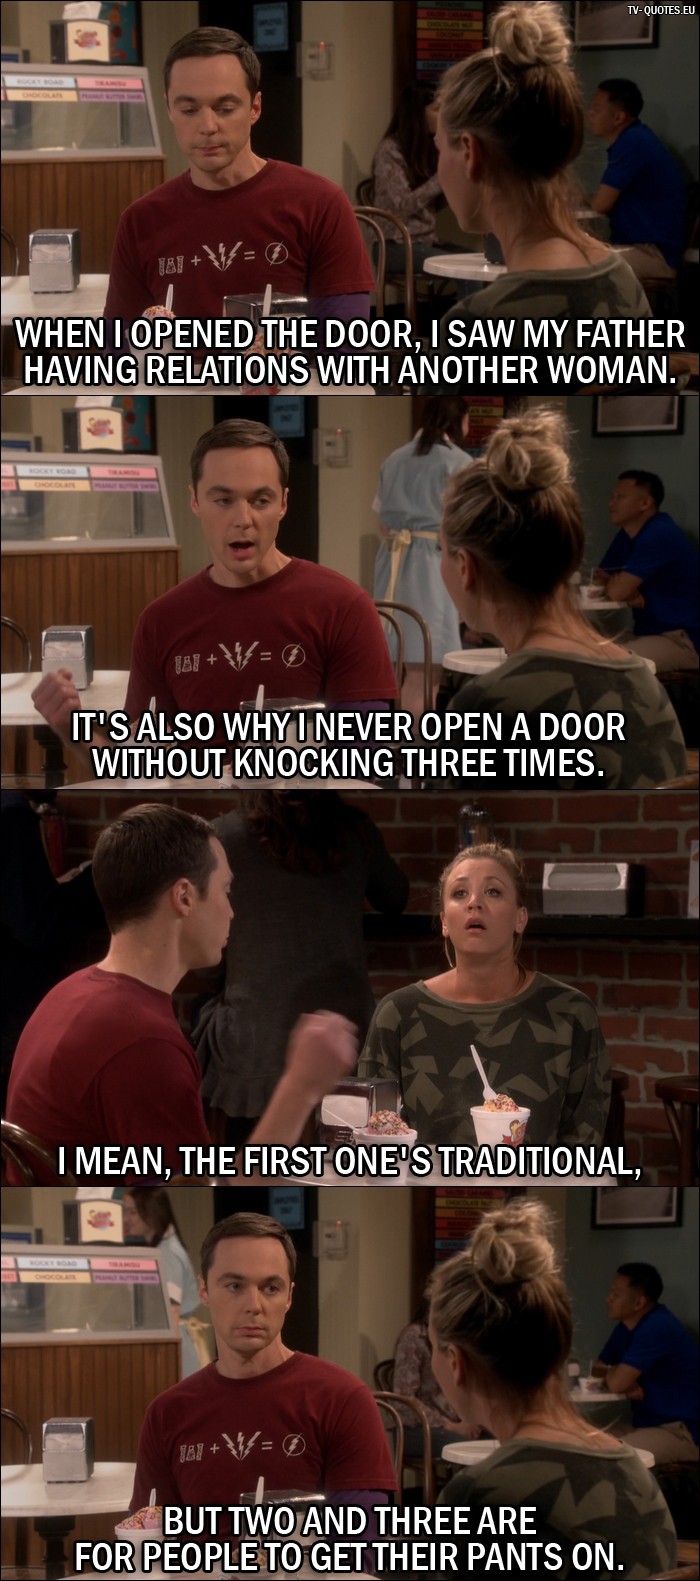 The Big Bang Theory Quote from 10x05 - Sheldon Cooper: When I opened the door, I saw my father having relations with another woman. Penny Hofstadter: Oh, that's awful! Sheldon Cooper: I know. It's also why I never open a door without knocking three times. I mean, the first one's traditional, but two and three are for people to get their pants on.